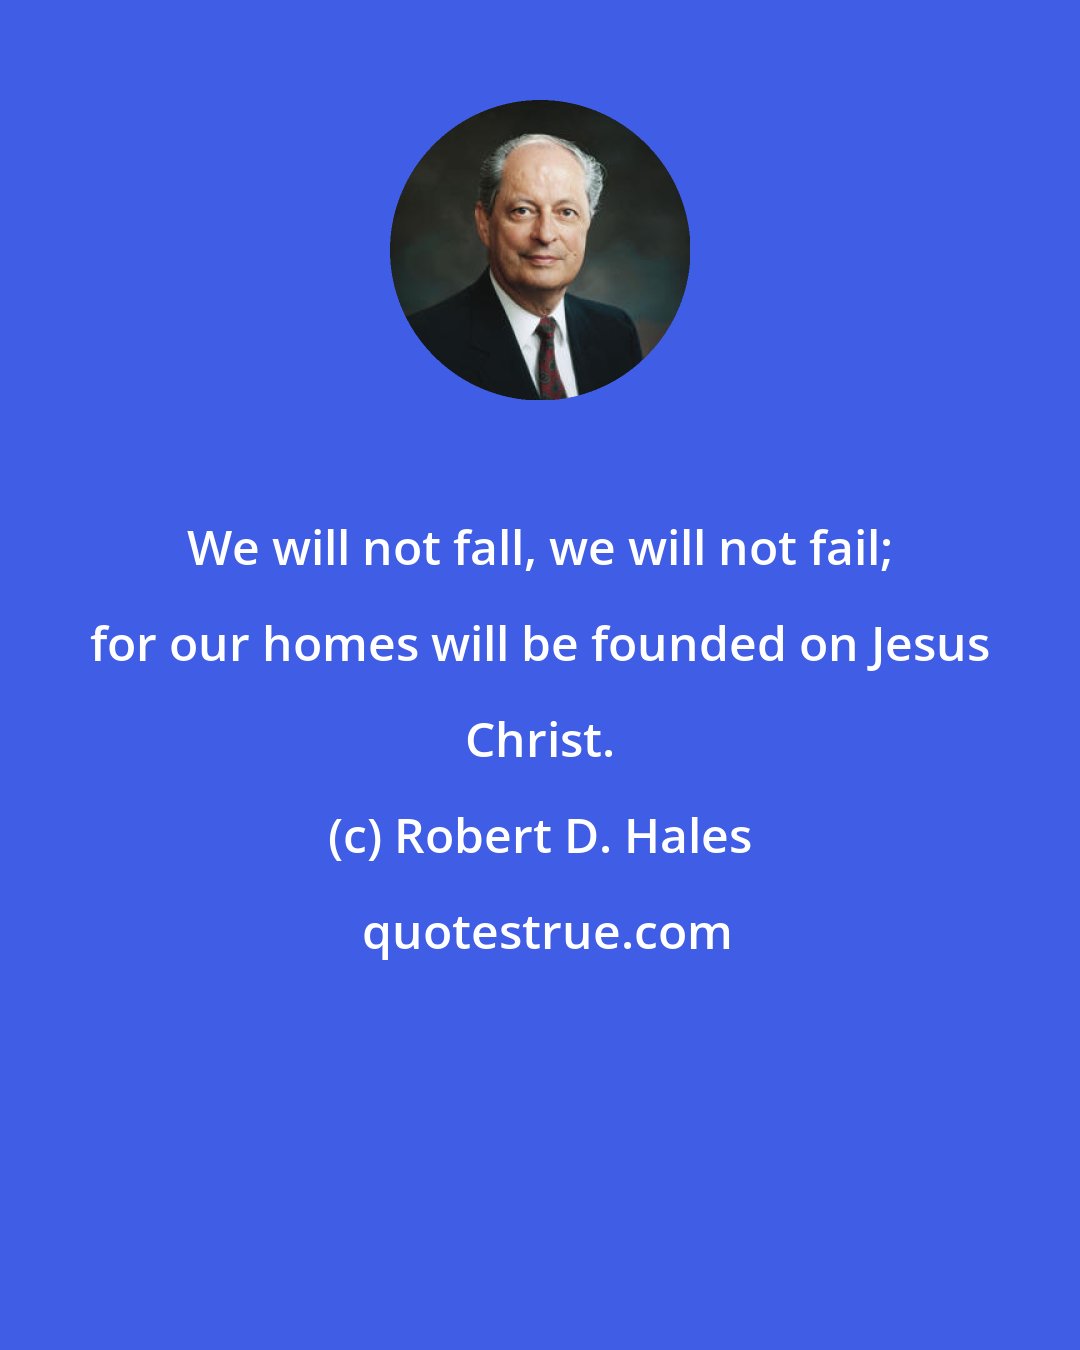 Robert D. Hales: We will not fall, we will not fail; for our homes will be founded on Jesus Christ.